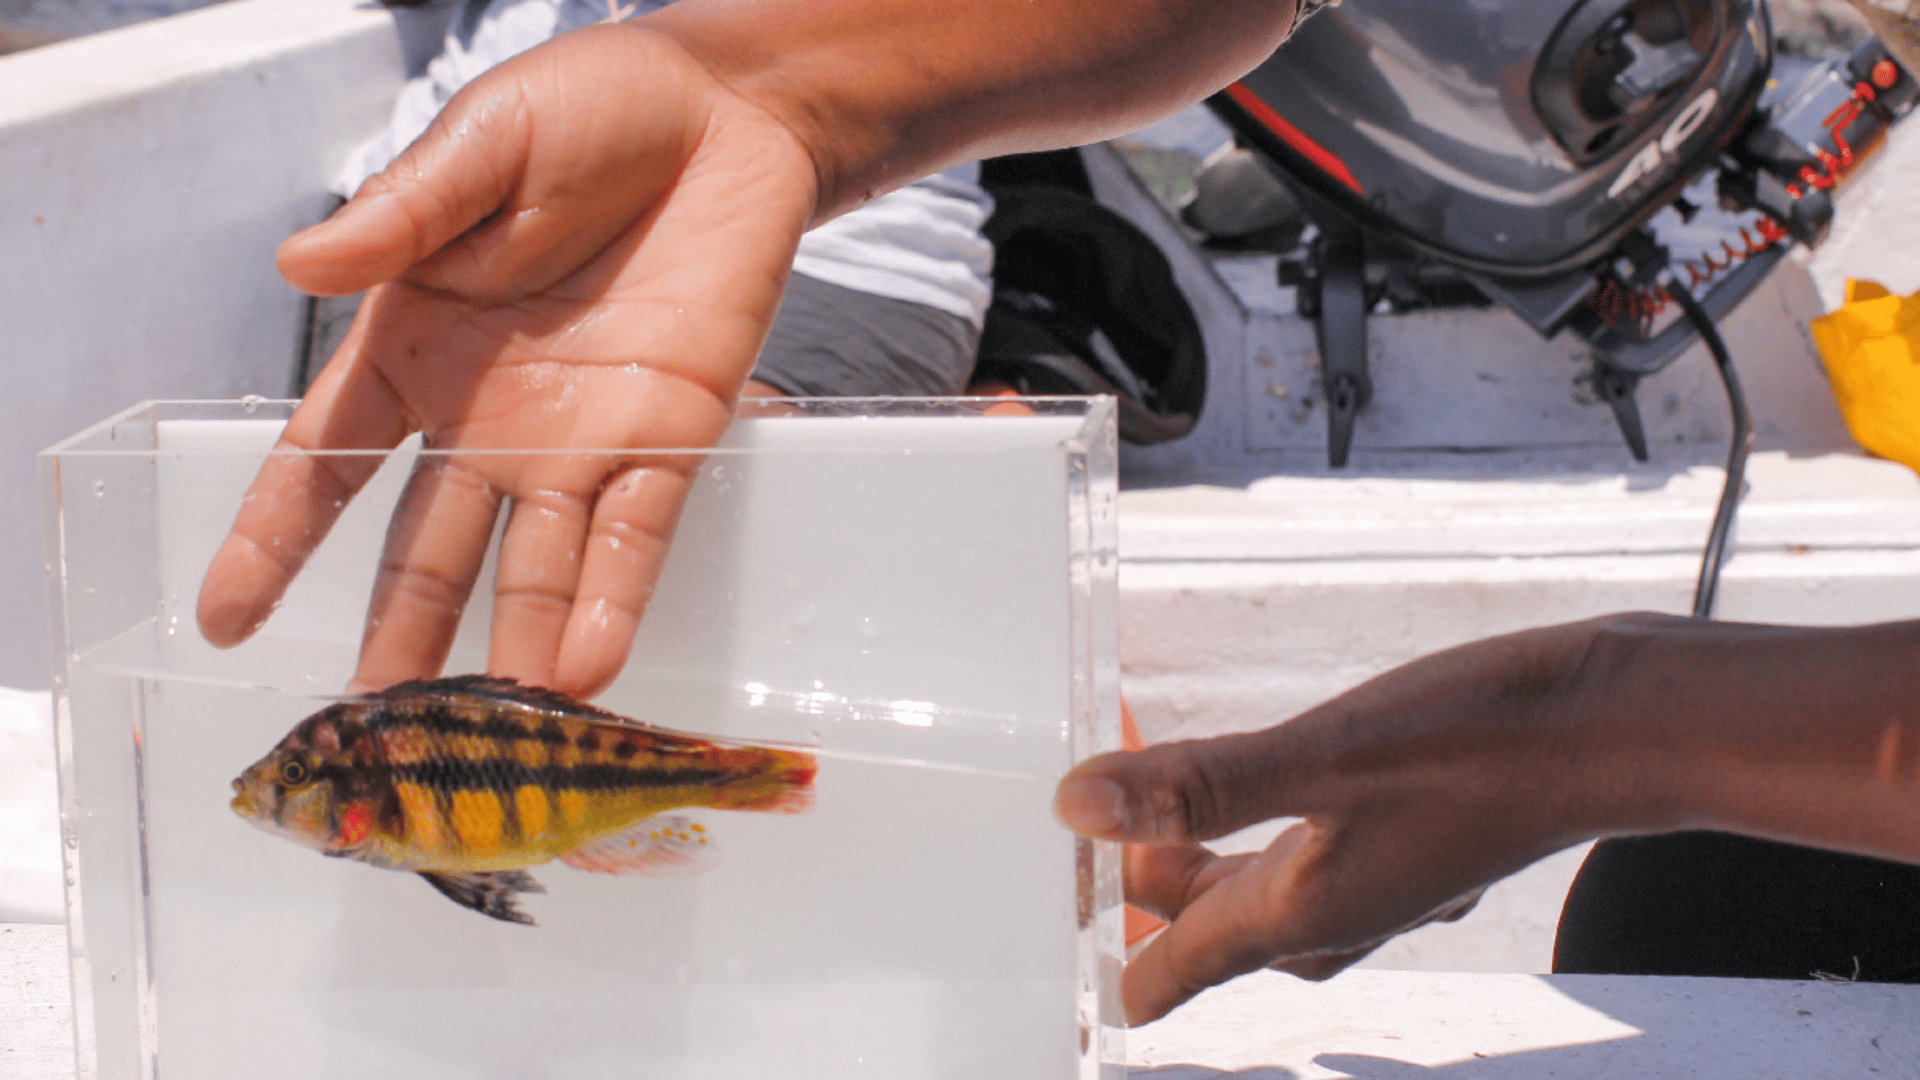 Researchers Discover 500 Species of Fish Rapidly Evolved NARE NGOEPE